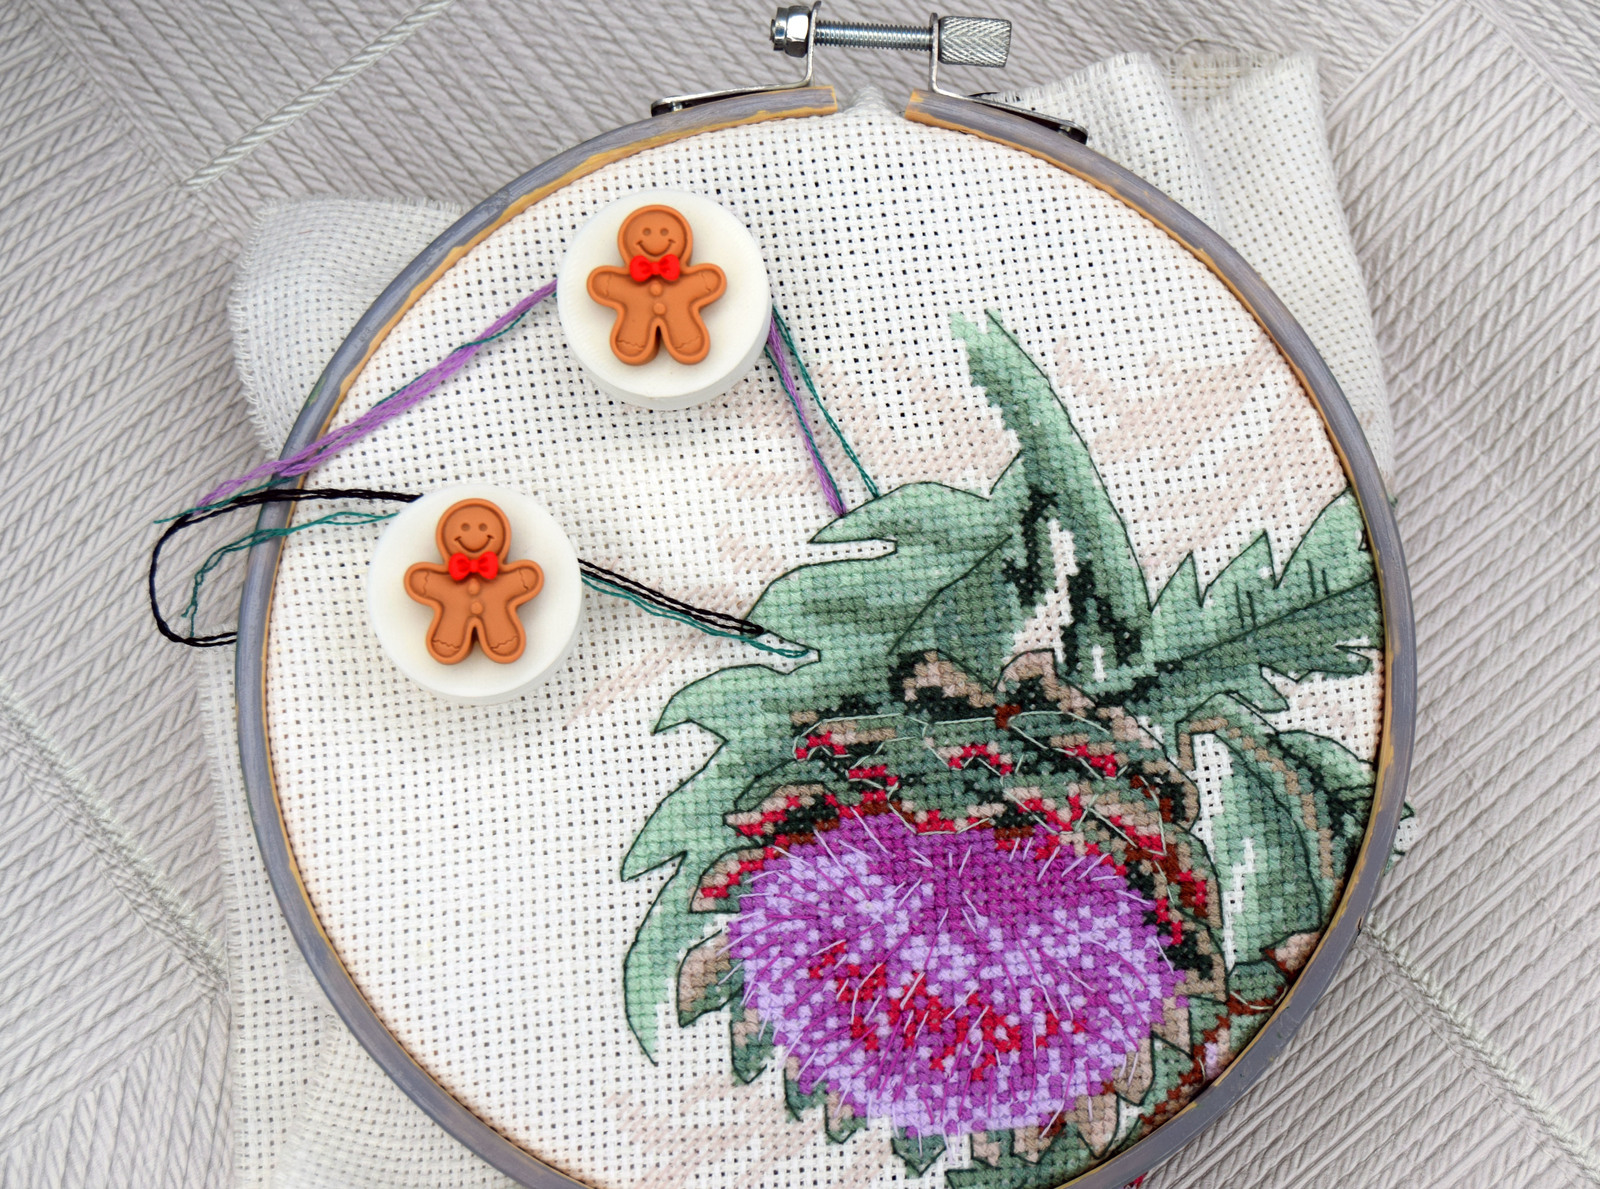 Cross stitch pattern holder needle minder for embroidery Magnetic floss bobbins - $20.90